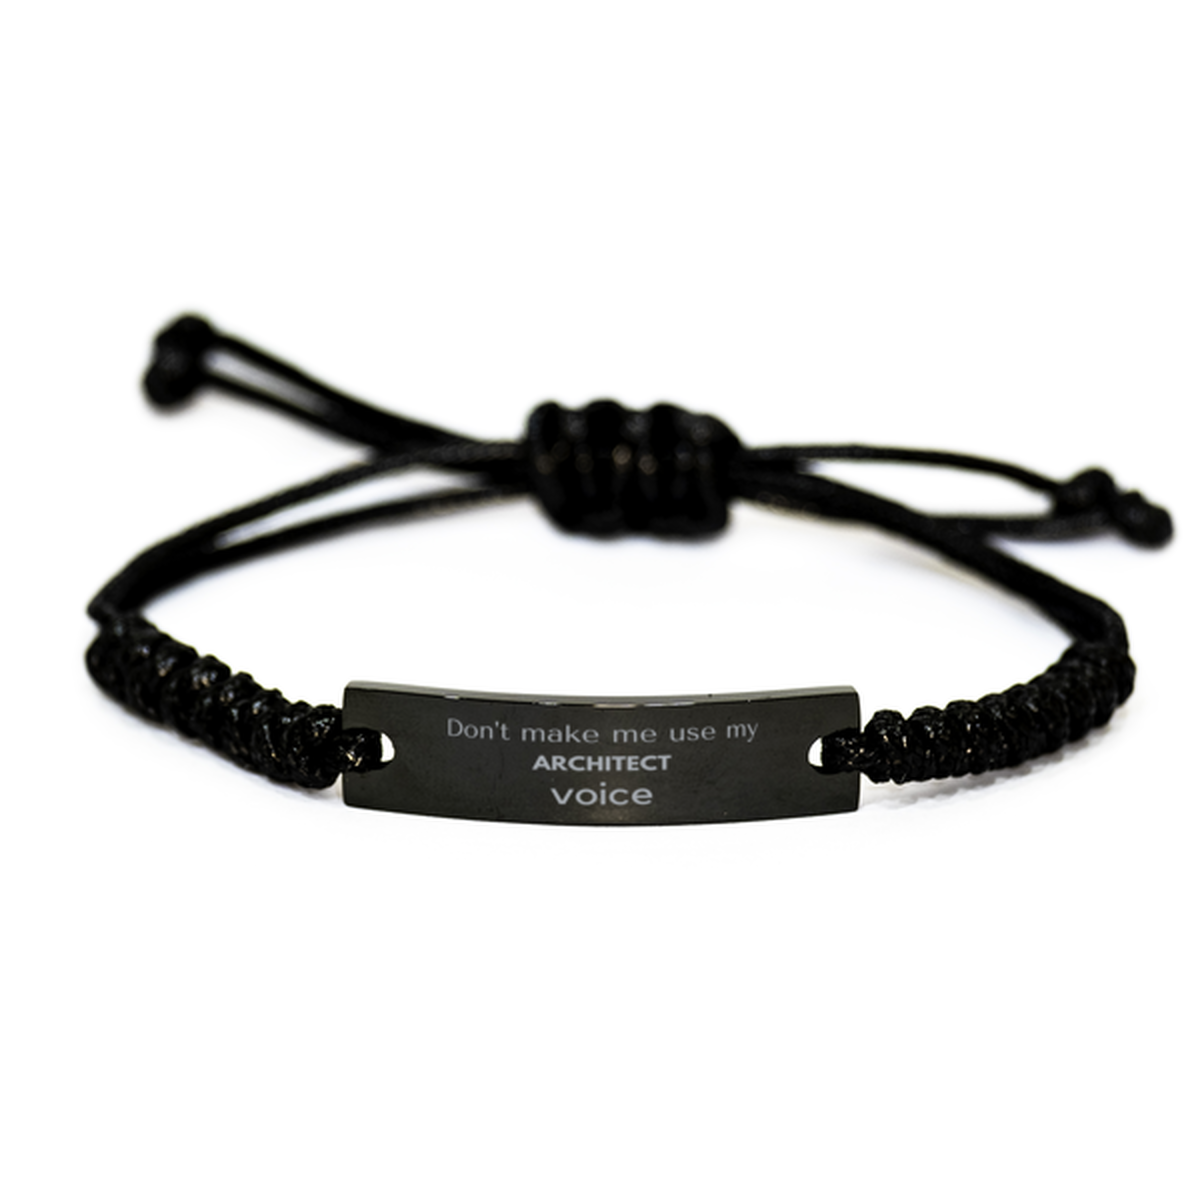 Don't make me use my Architect voice, Sarcasm Architect Gifts, Christmas Architect Black Rope Bracelet Birthday Unique Gifts For Architect Coworkers, Men, Women, Colleague, Friends